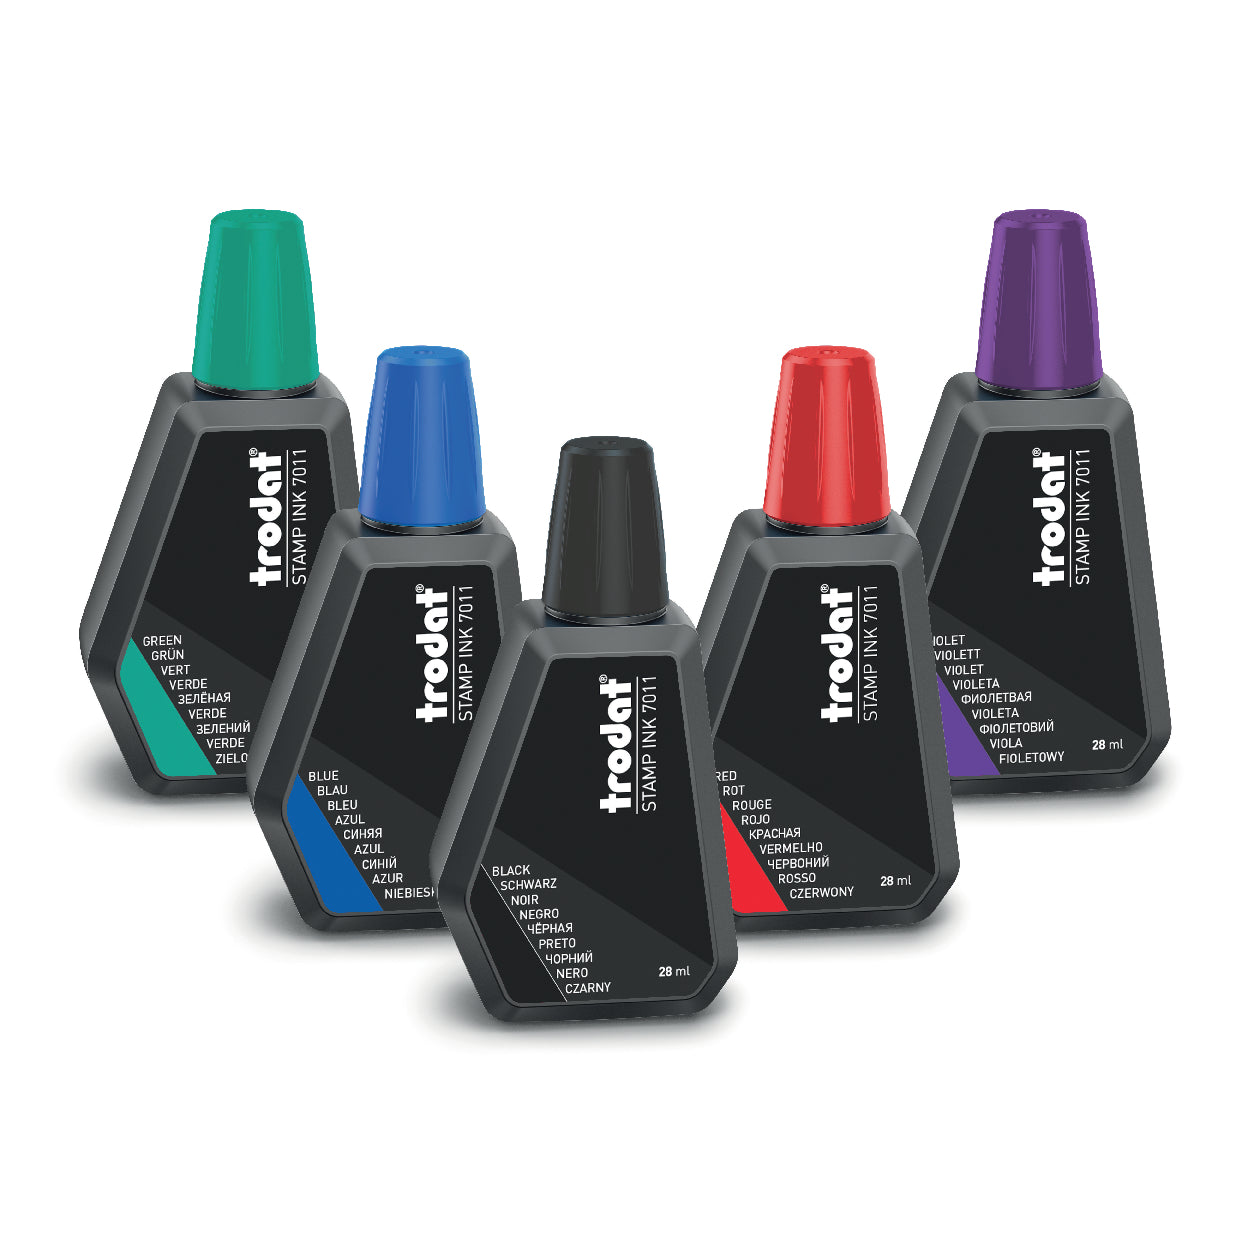 Red 1oz Self Inking Refill Ink